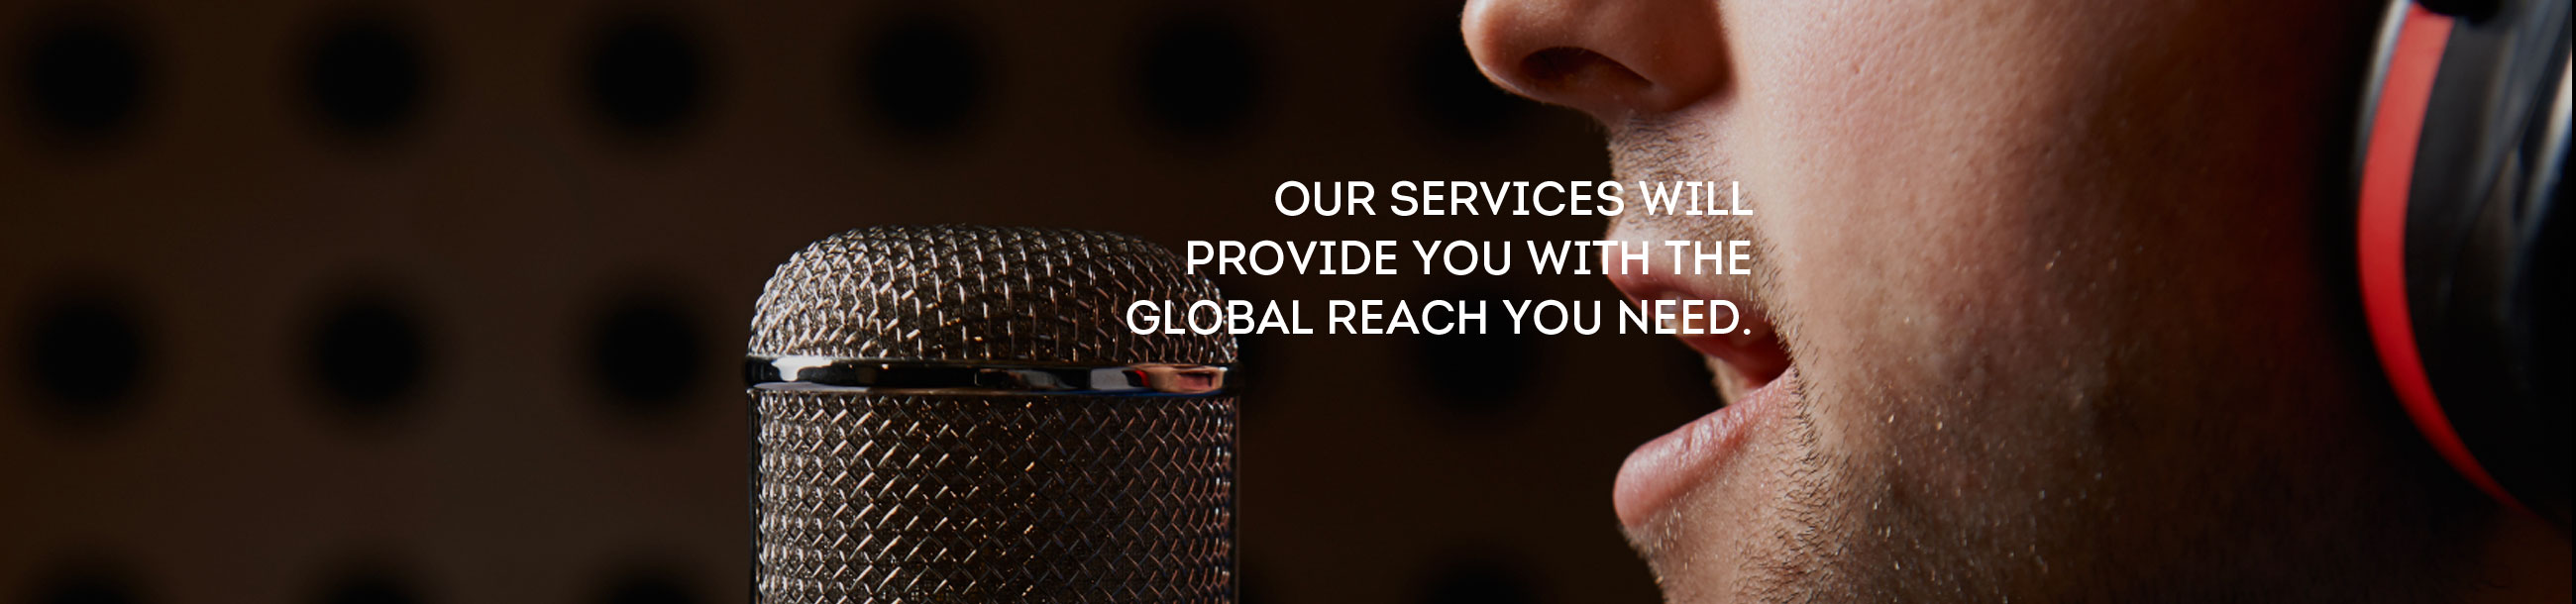 Our Services Will Provide Your With Global Reach You Need